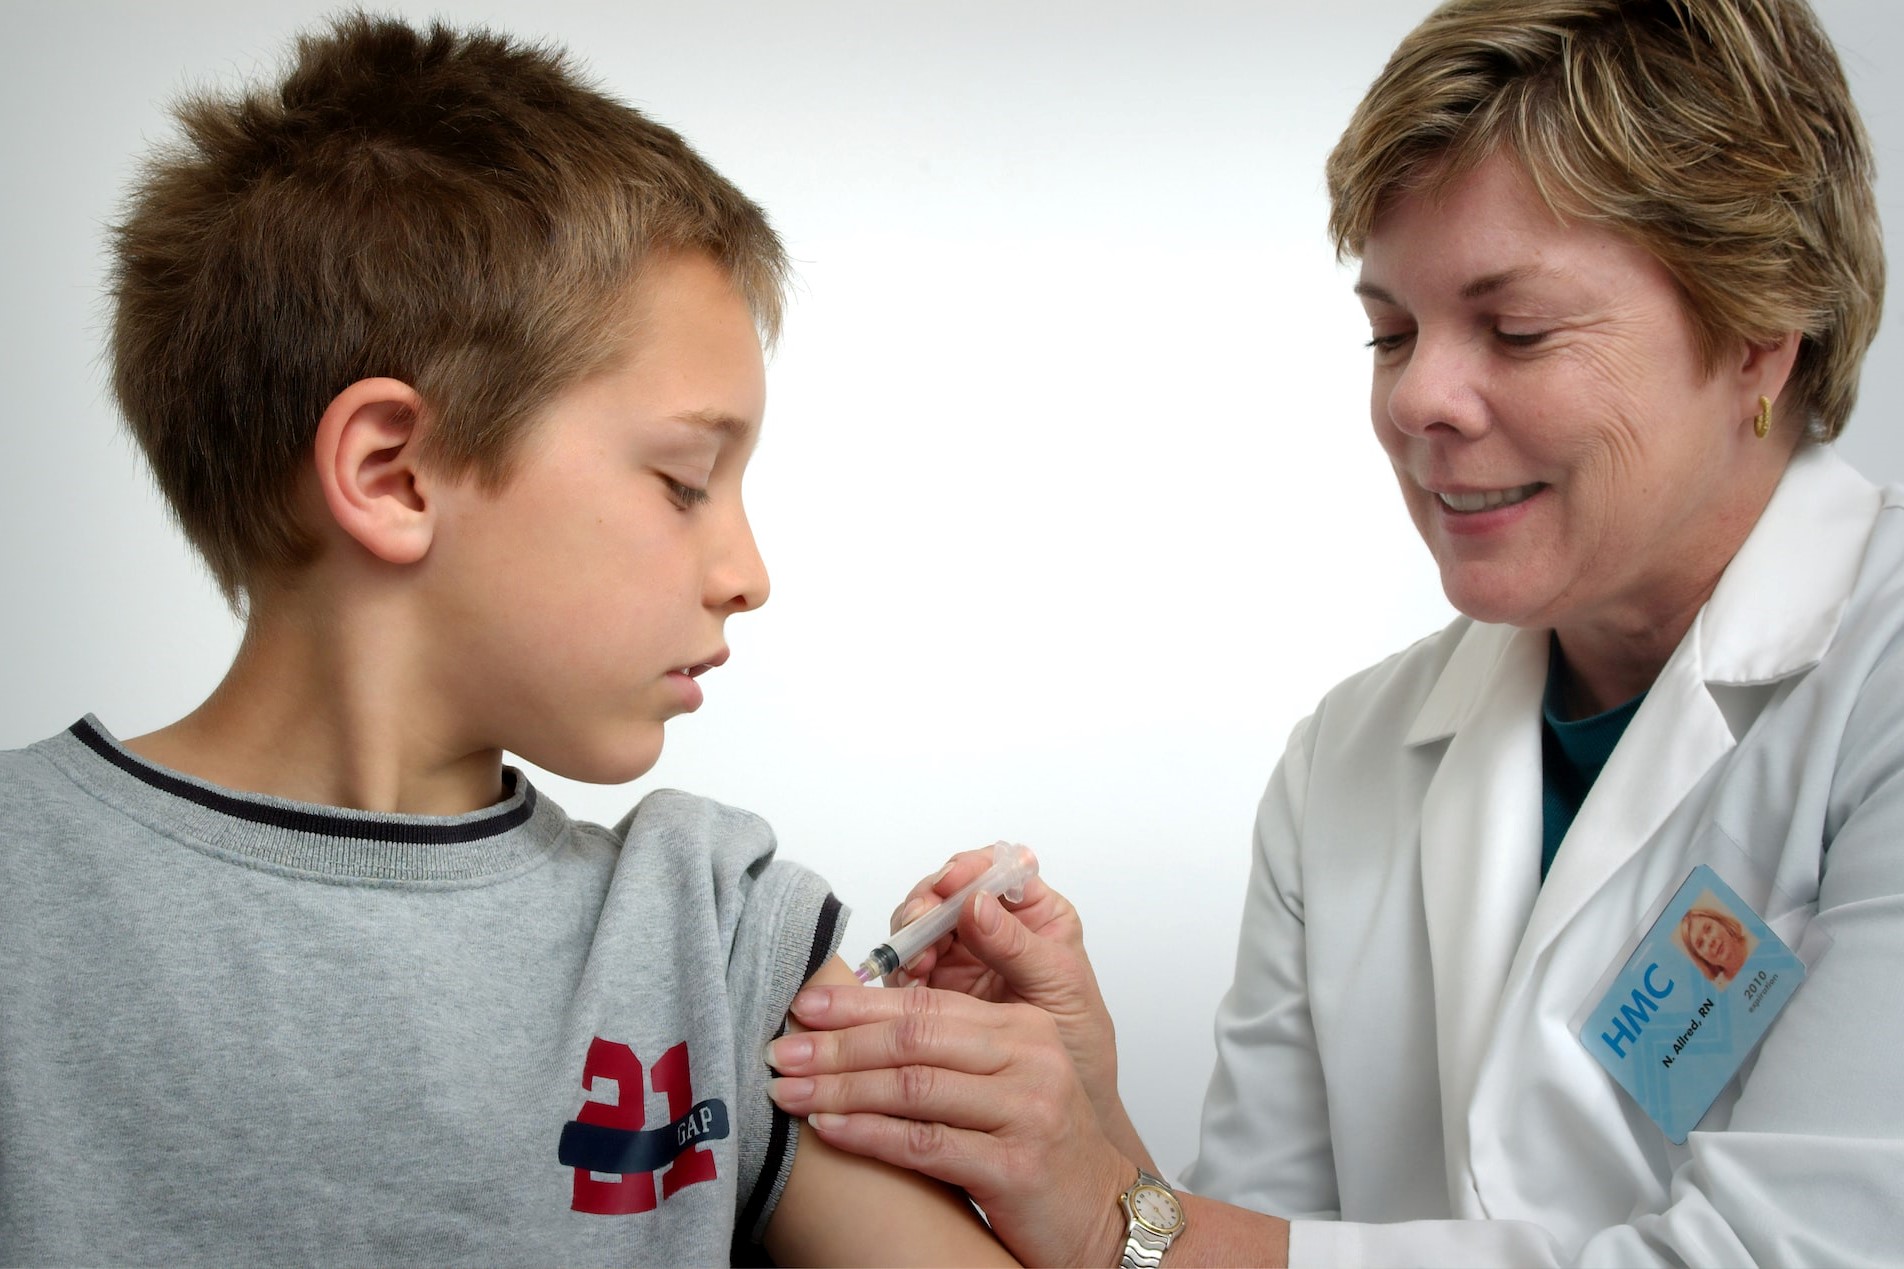 The nurse depicted in this 2006 photograph was in the process of administering an intramuscular vaccination in the left shoulder of a young boy | Kids Car Donations